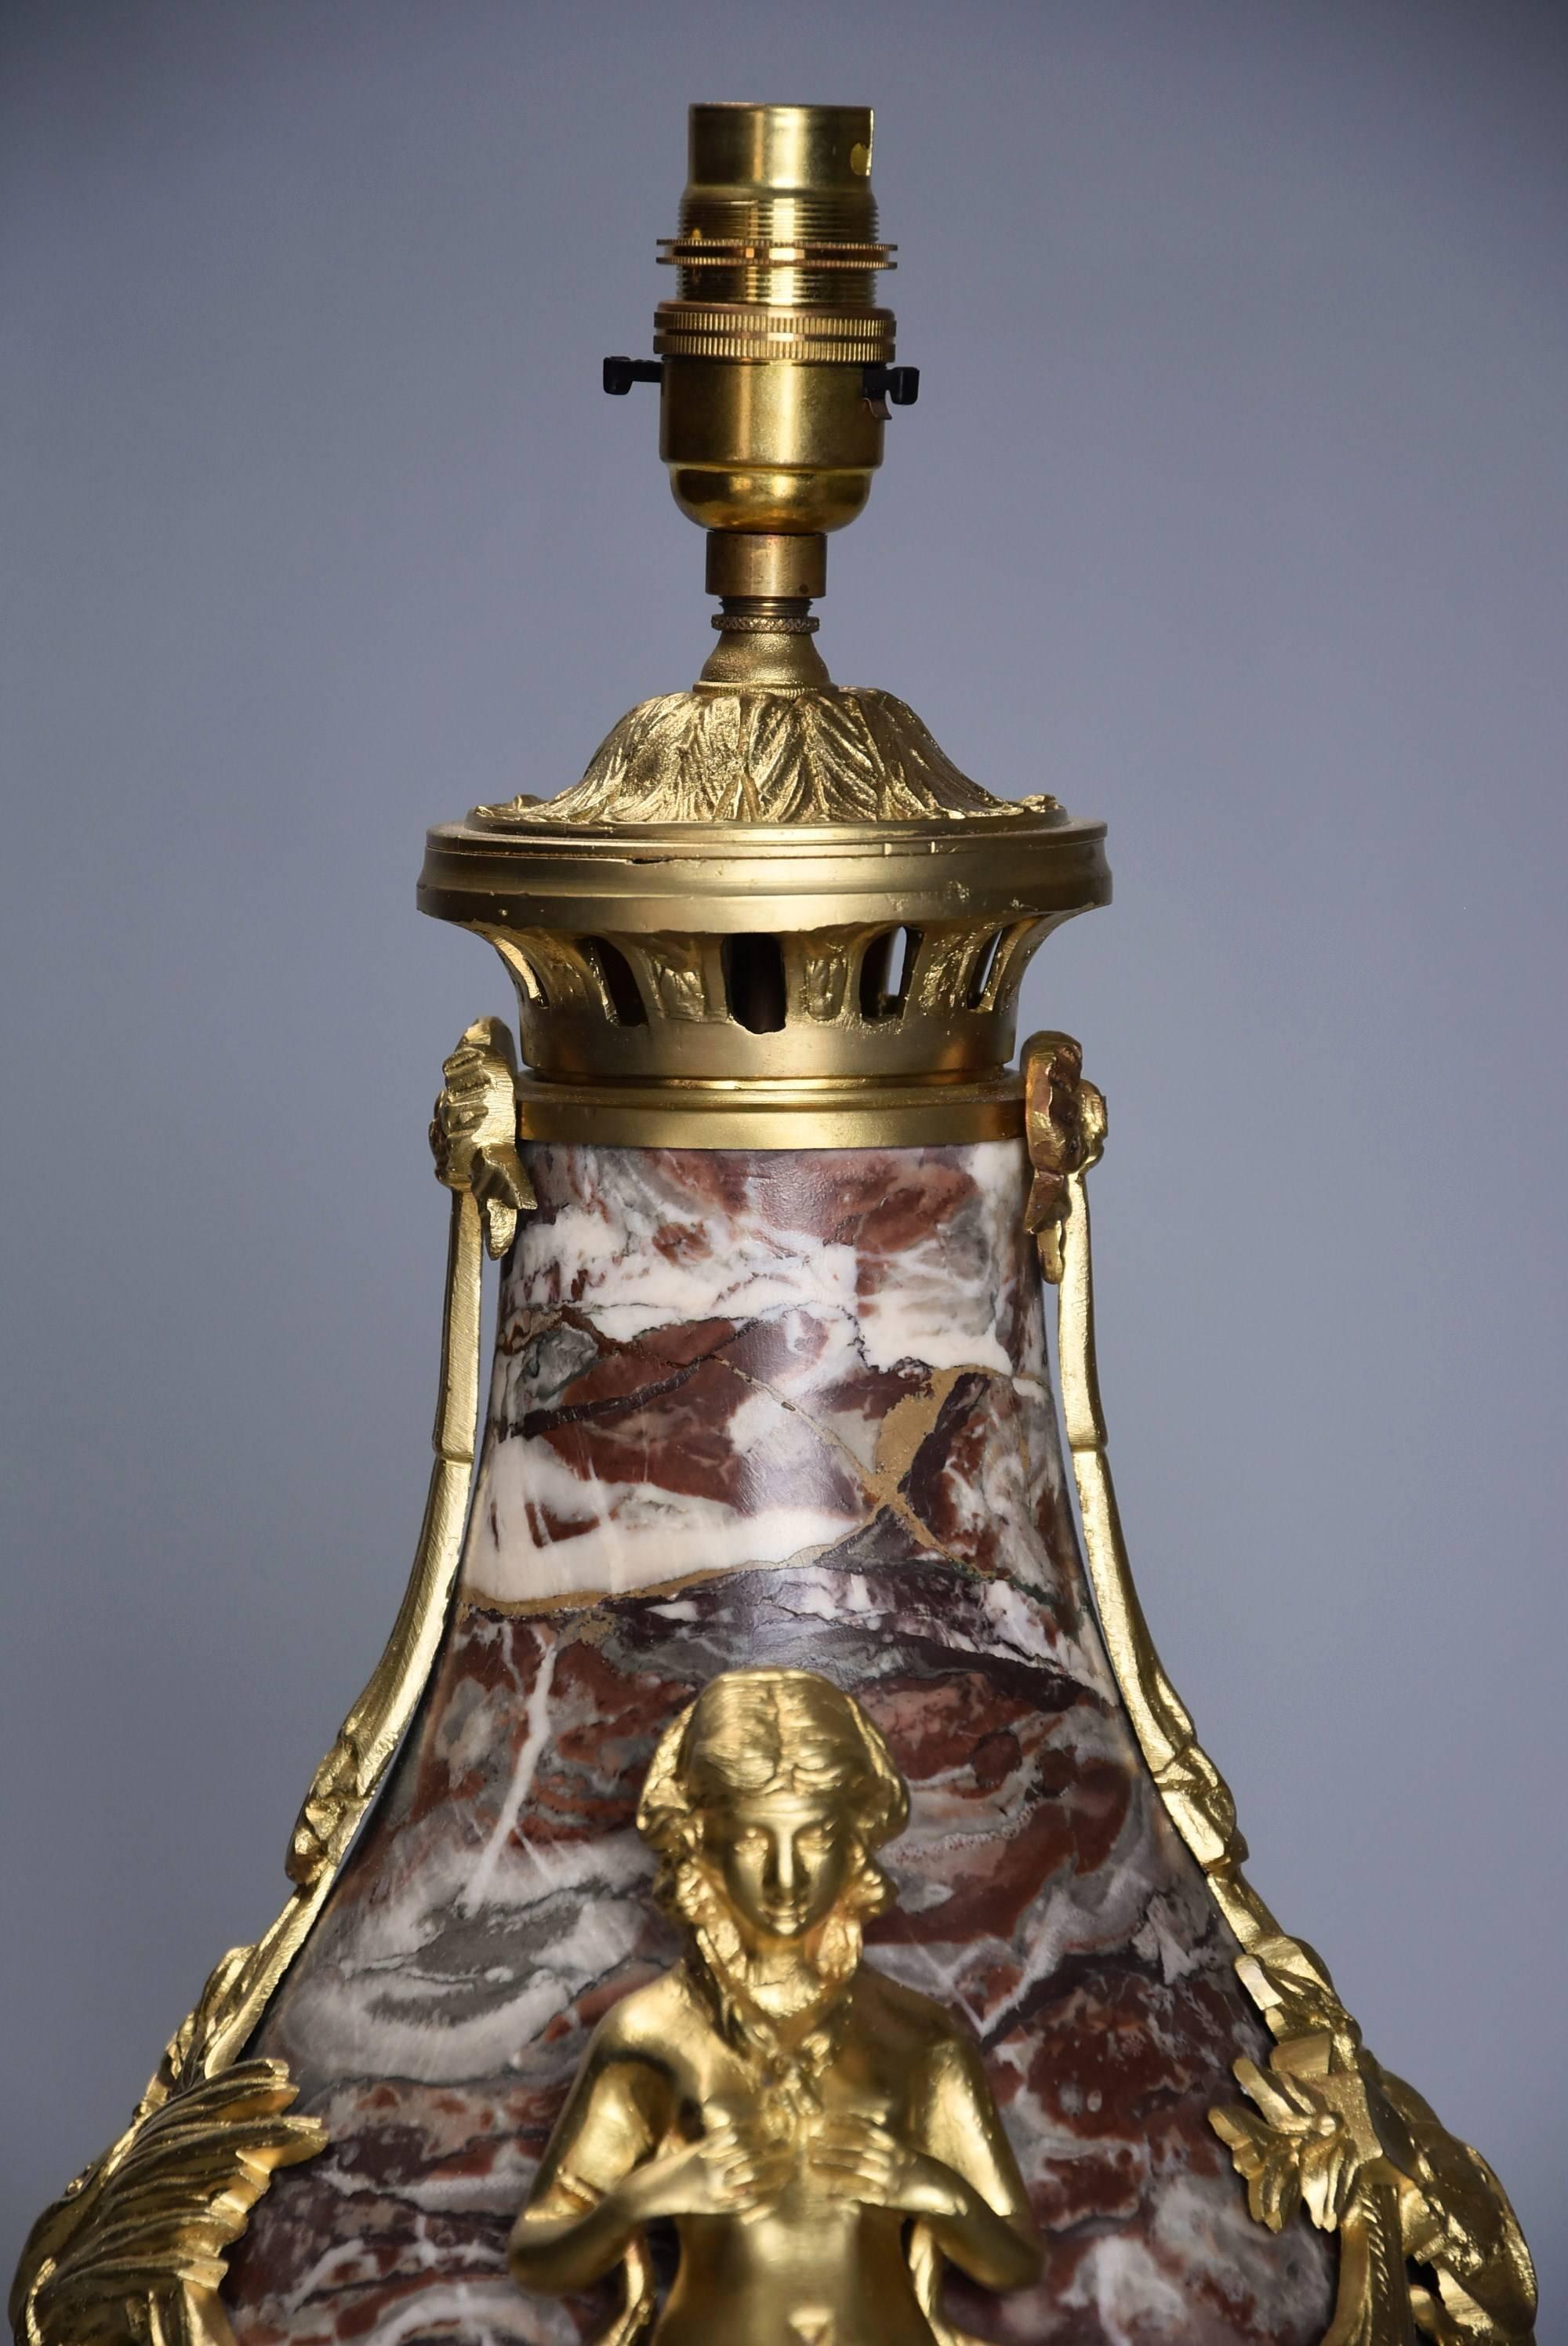 A large fine quality late 19th century French marble table lamp with ormolu embellishments

This highly decorative lamp consists of a vase shaped marble base with fine quality ormolu fittings of leaf design to the top leading down to ribbon and